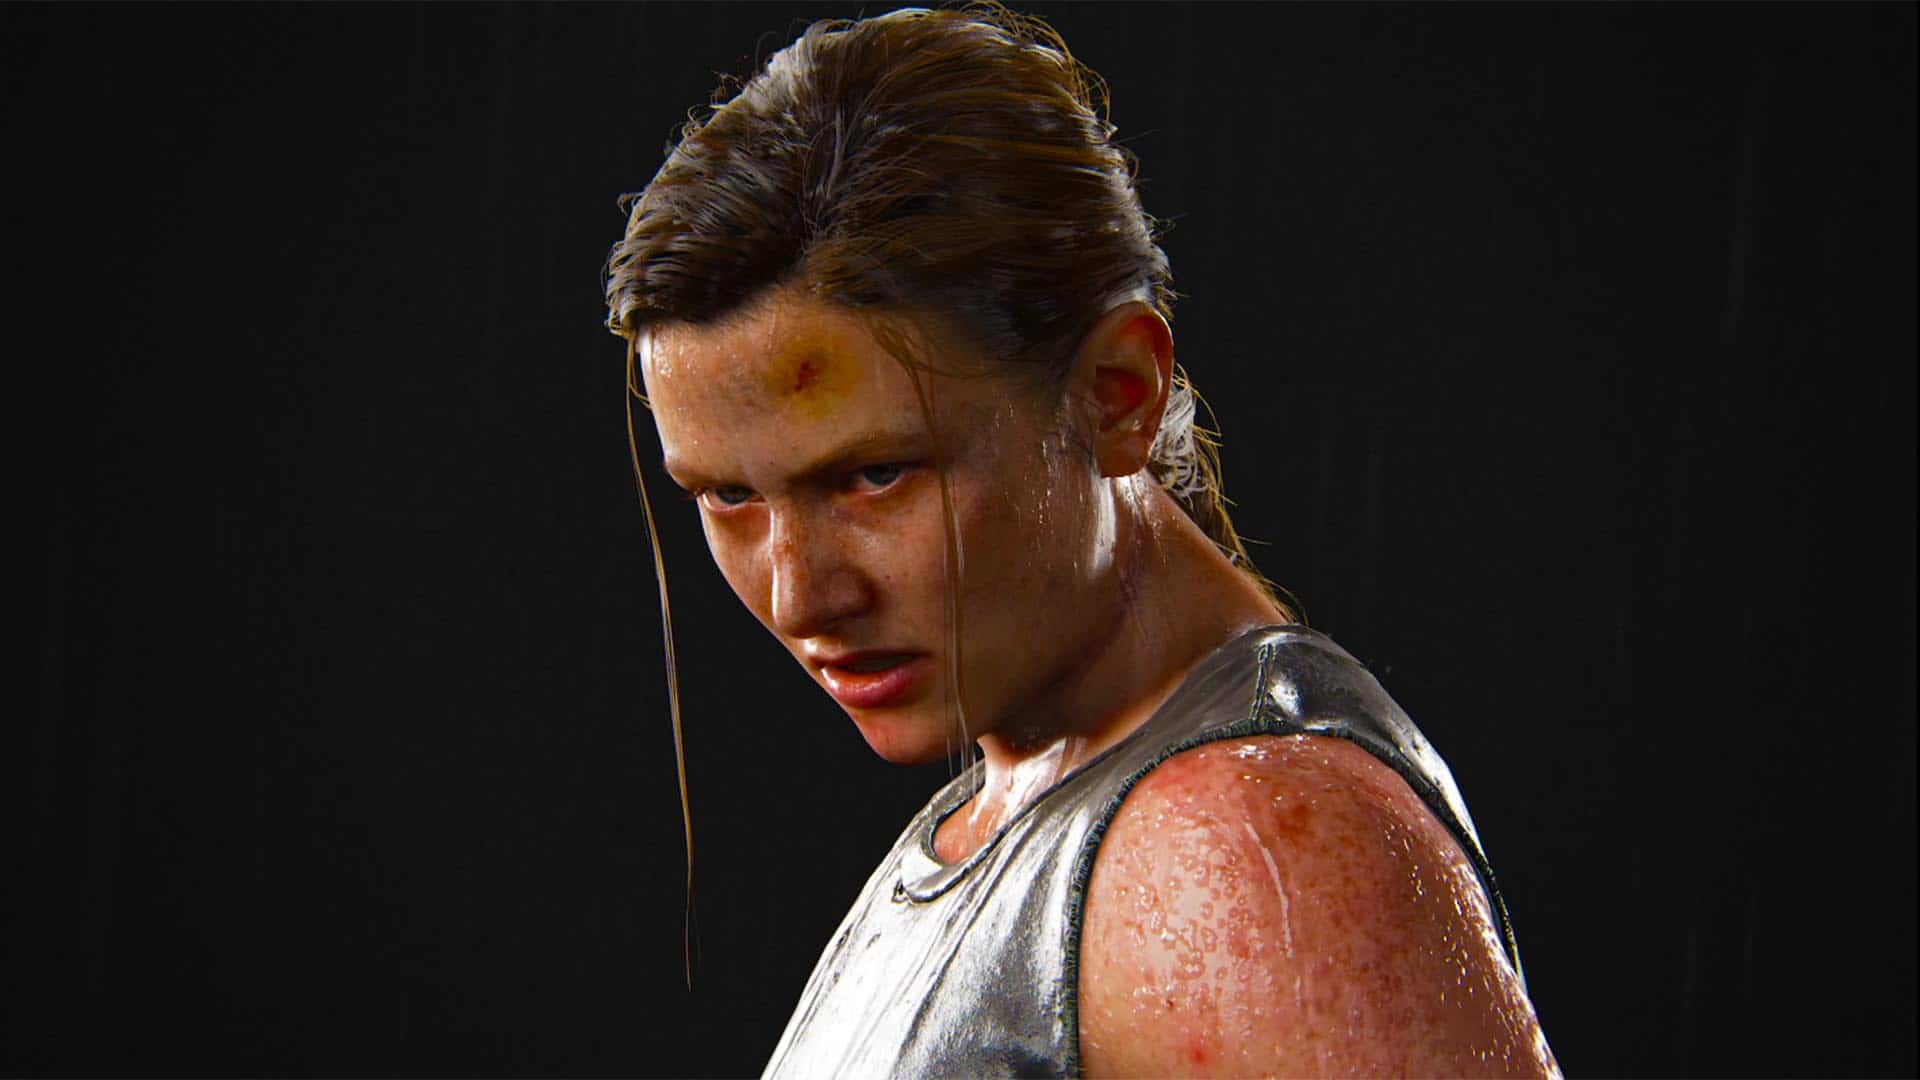 Does Abby from The last of us part II have potential to be 